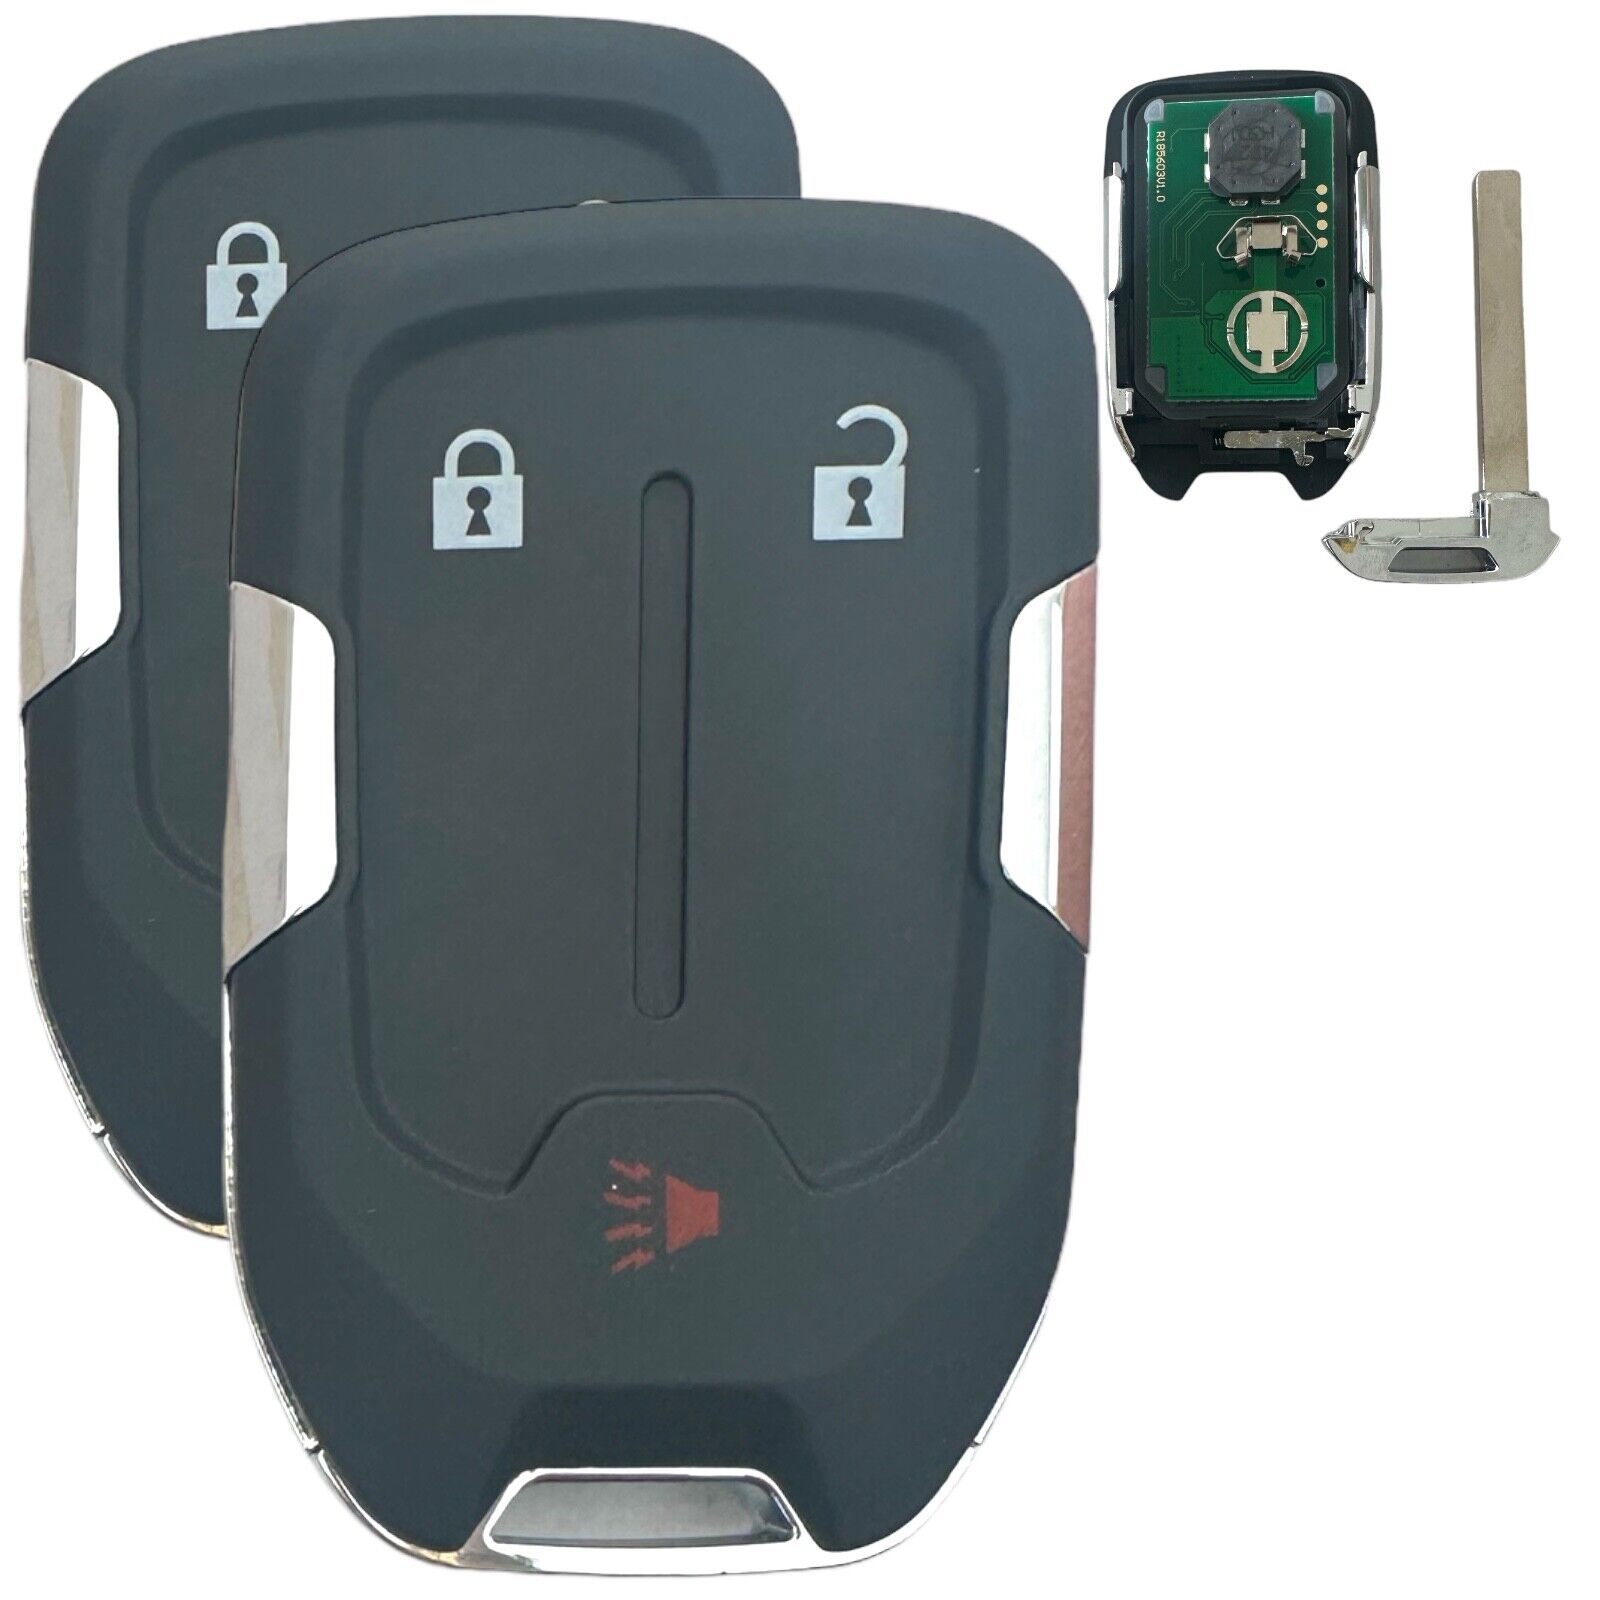 2x New Replacement Proximity Key Fob for Select GMC Vehicles. HYQ1EA  433 MHz.